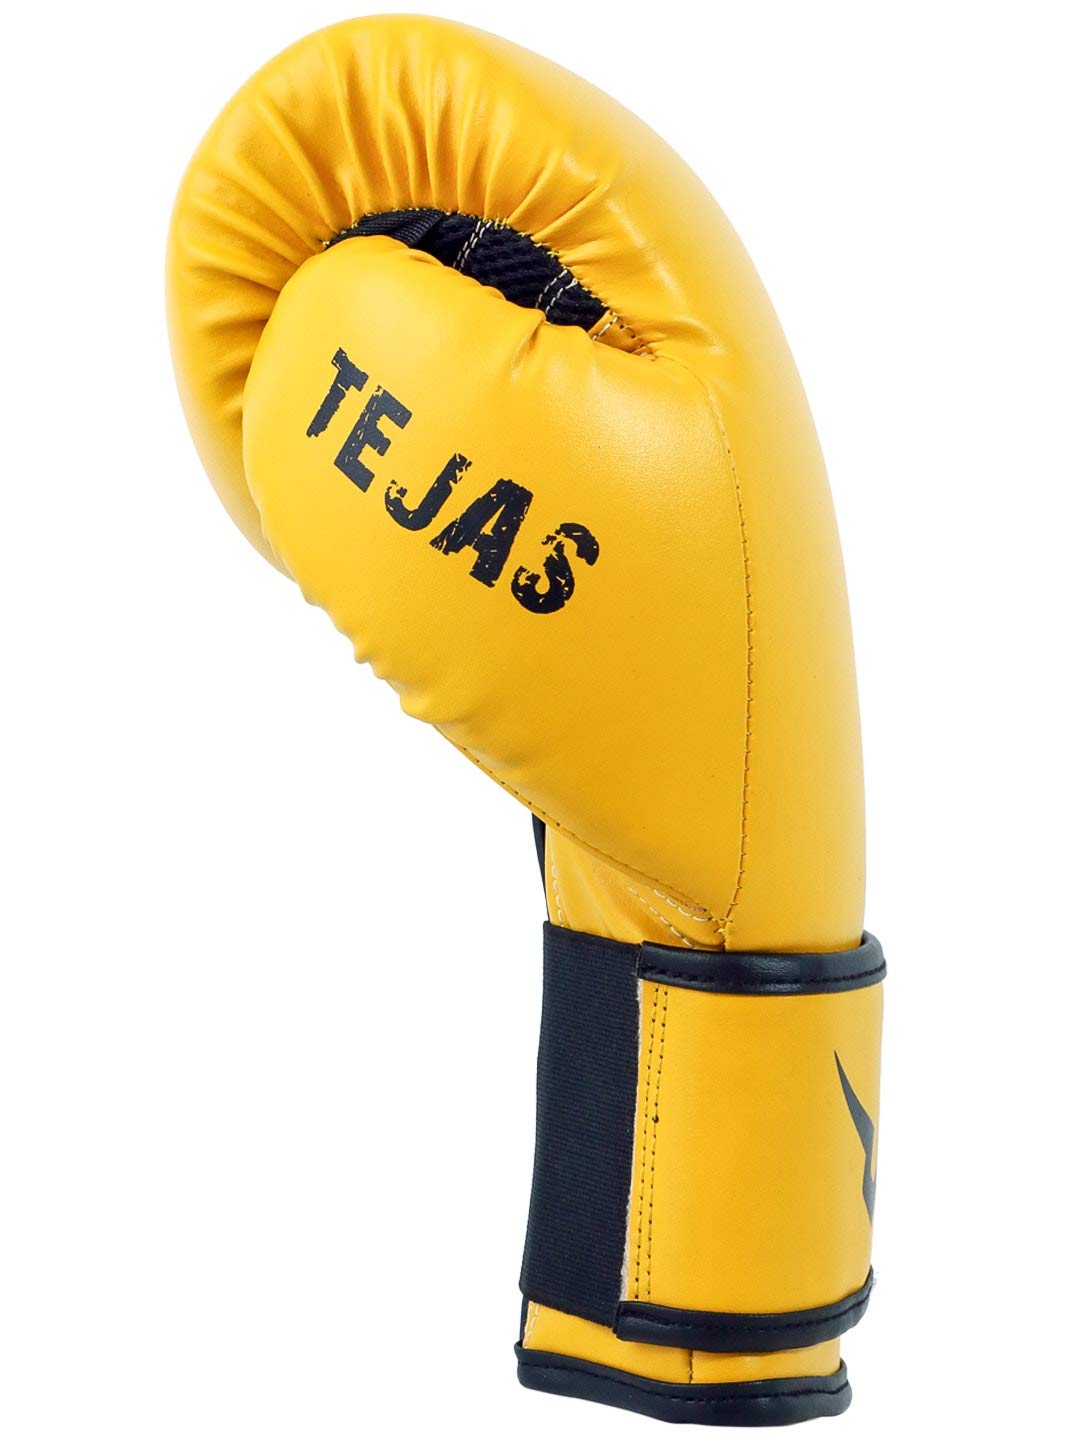 Invincible Tejas Fitness Training Synthetic Leather Gloves